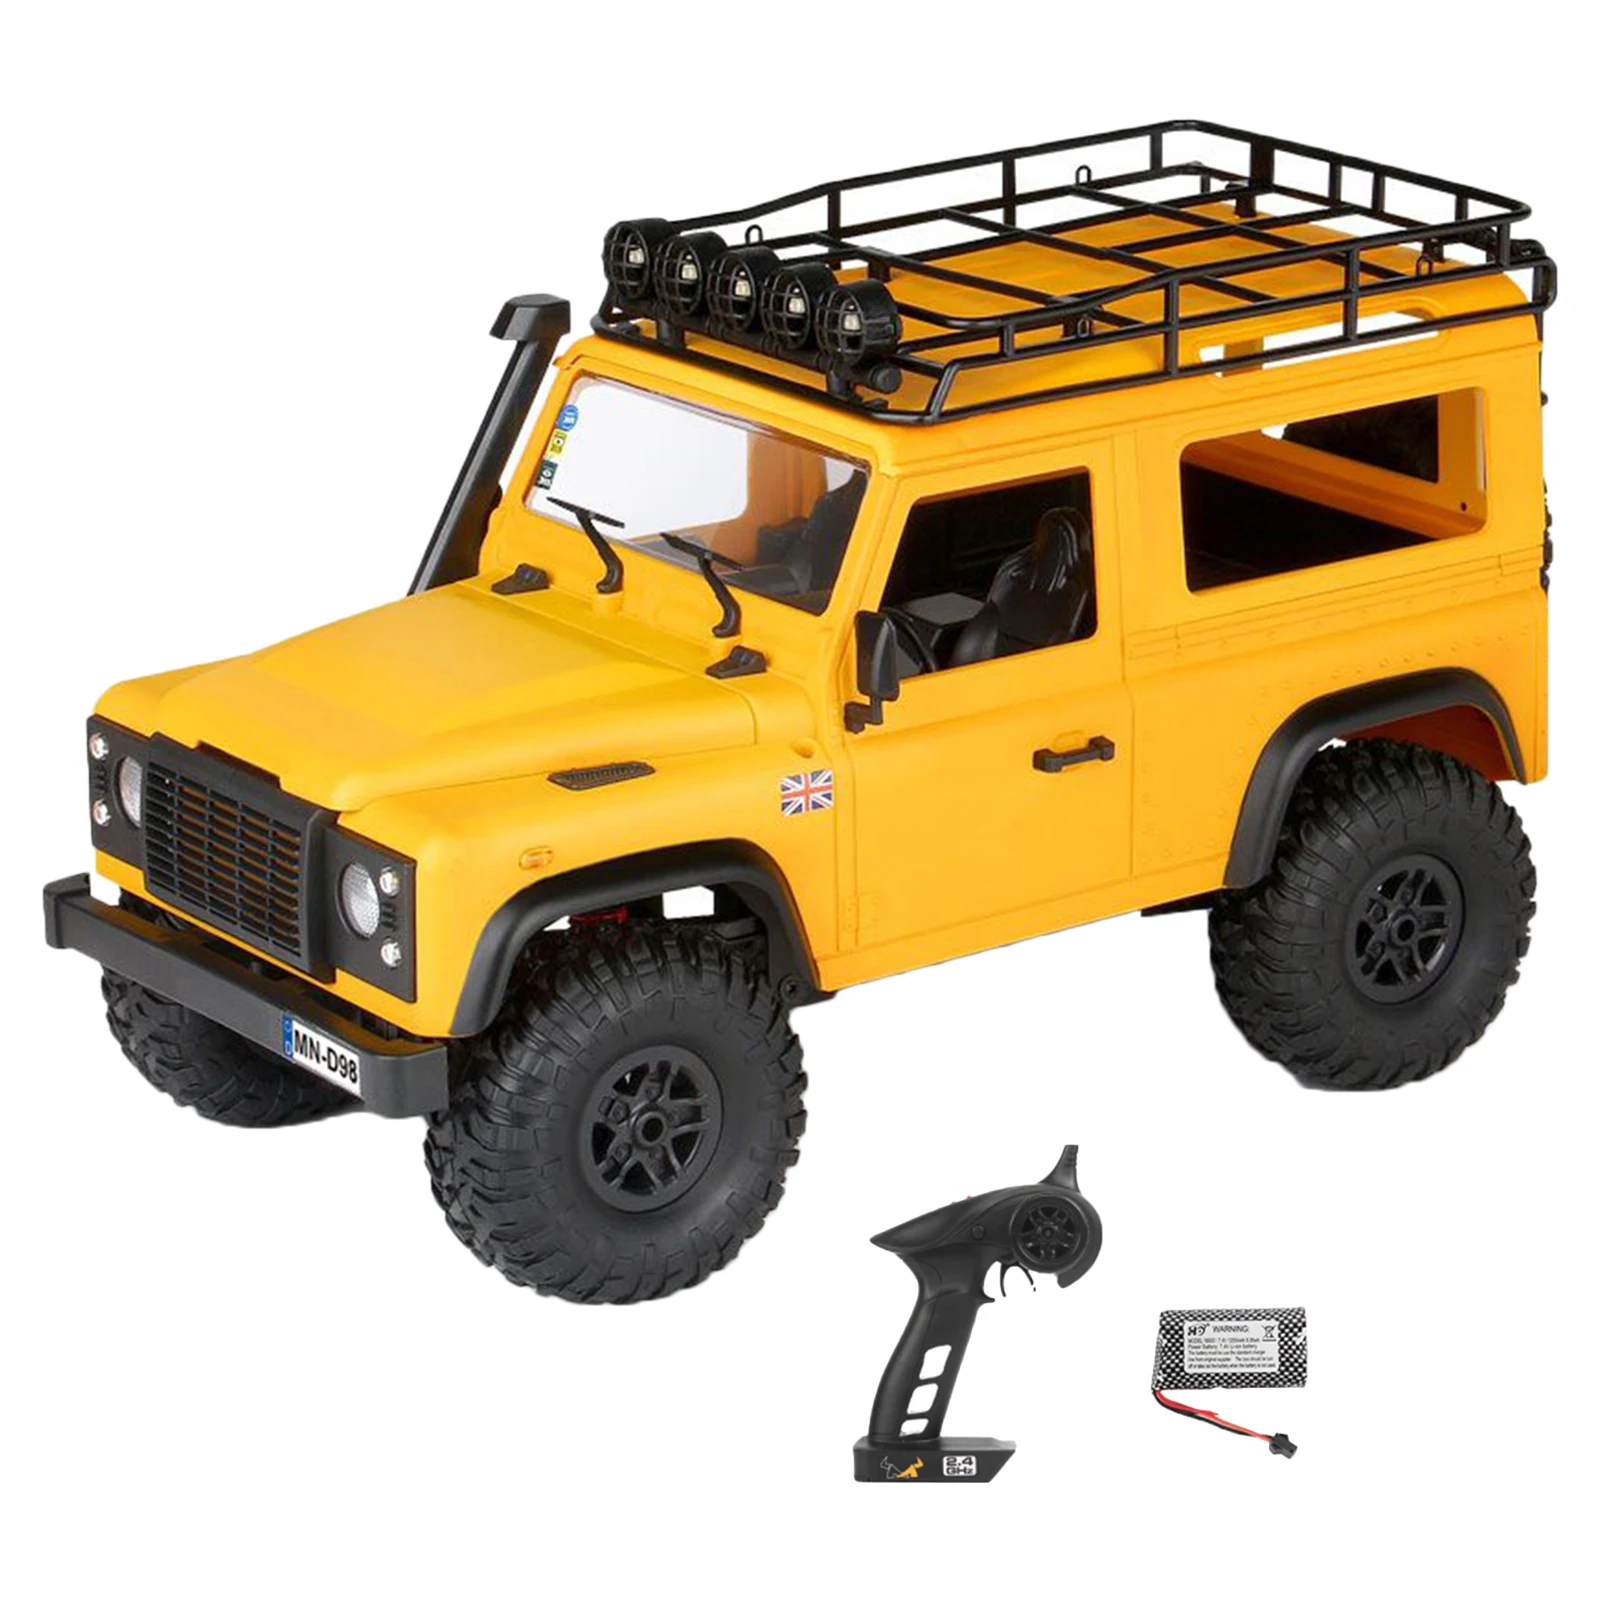 

8.72km/h Brushed Motor 2.4GHz 1/12 4WD Crawler RC Car Climbing Off-Road Vehicle Holiday Birthday Party Present